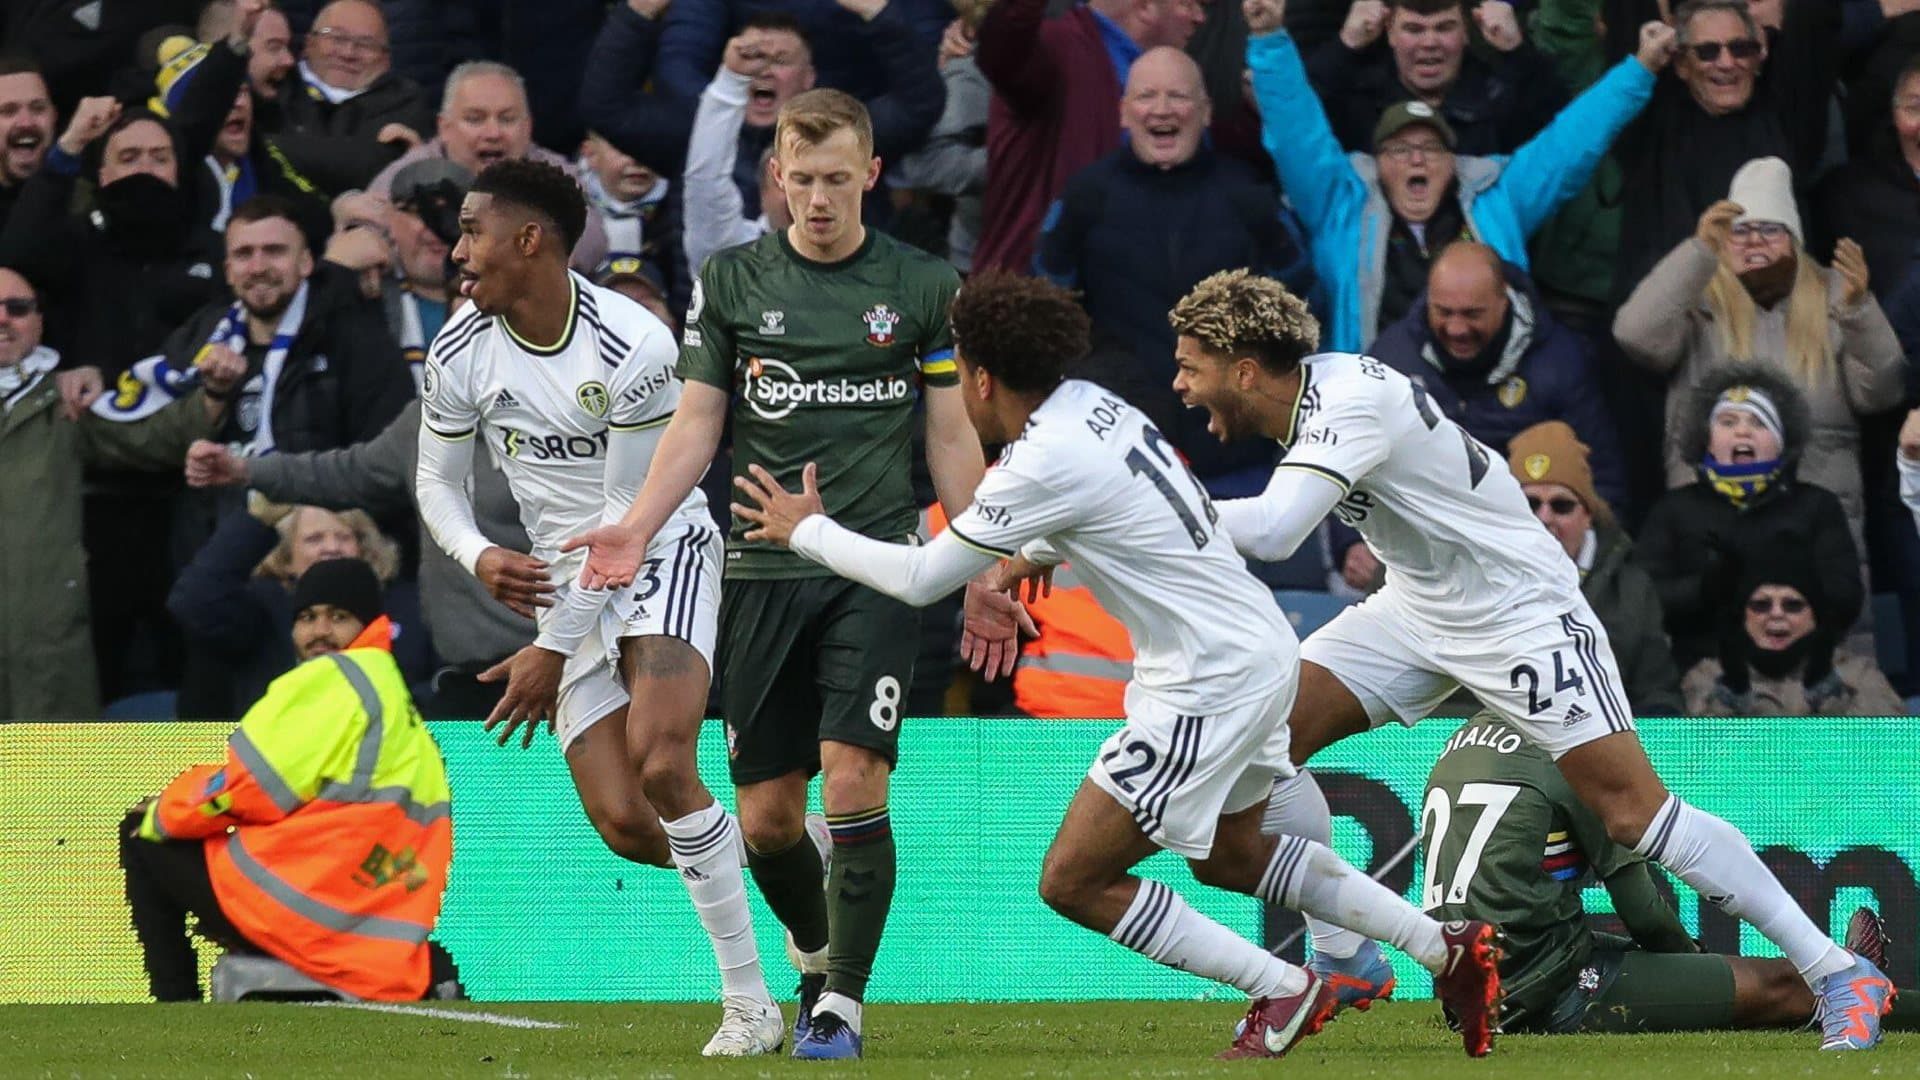 Junior Firpo sets off to celebrate his goal, while Southampton's James Ward-Prowse looks all miserable like 'boo hoo, why won't they let me score a free-kick, wah'